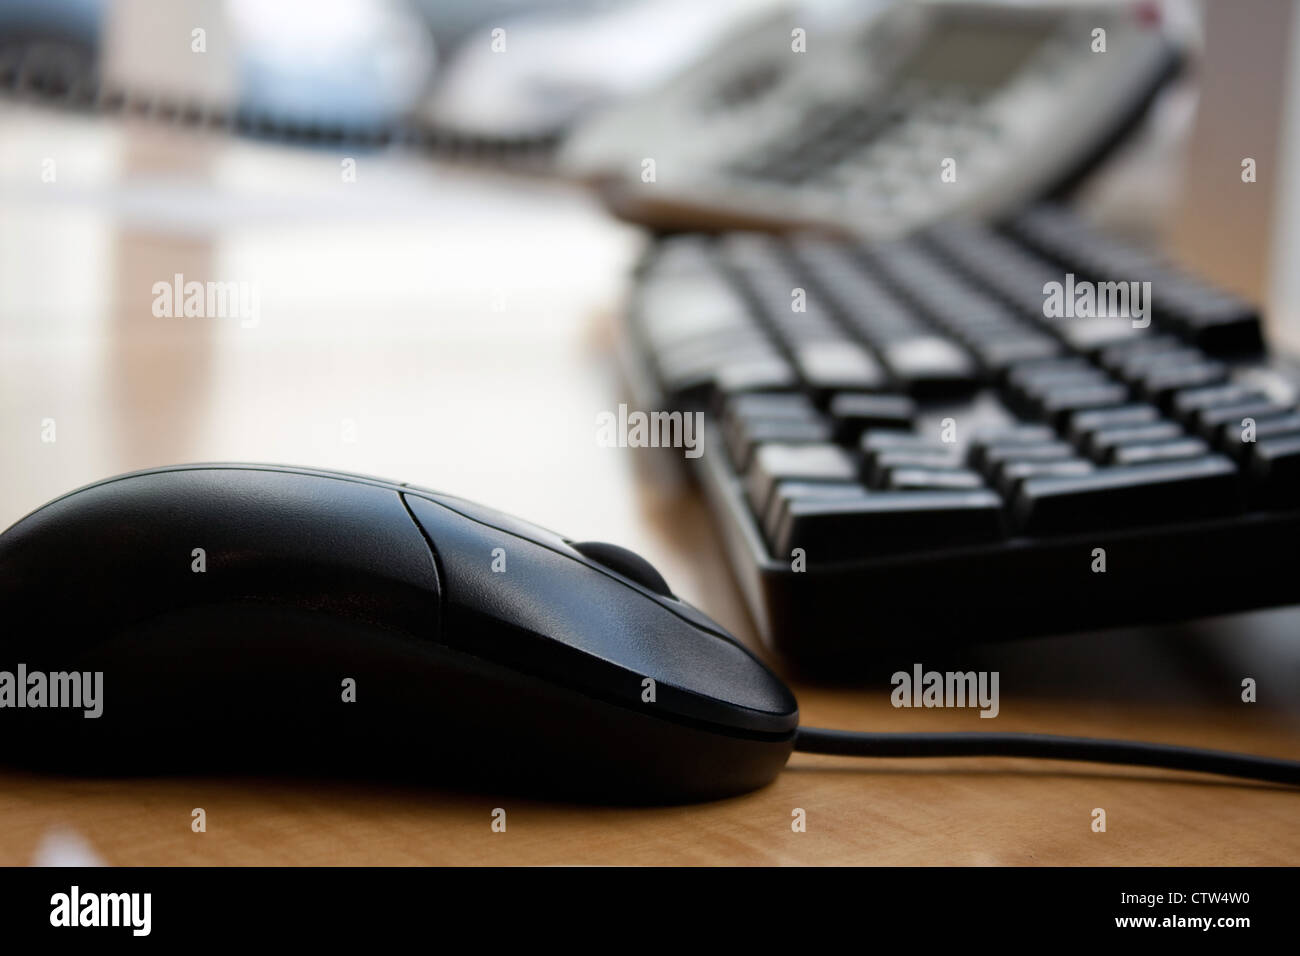 Close up of a modern office workplace desk setup with a computer mouse keyboard and phone. Shallow depth of field. Stock Photo